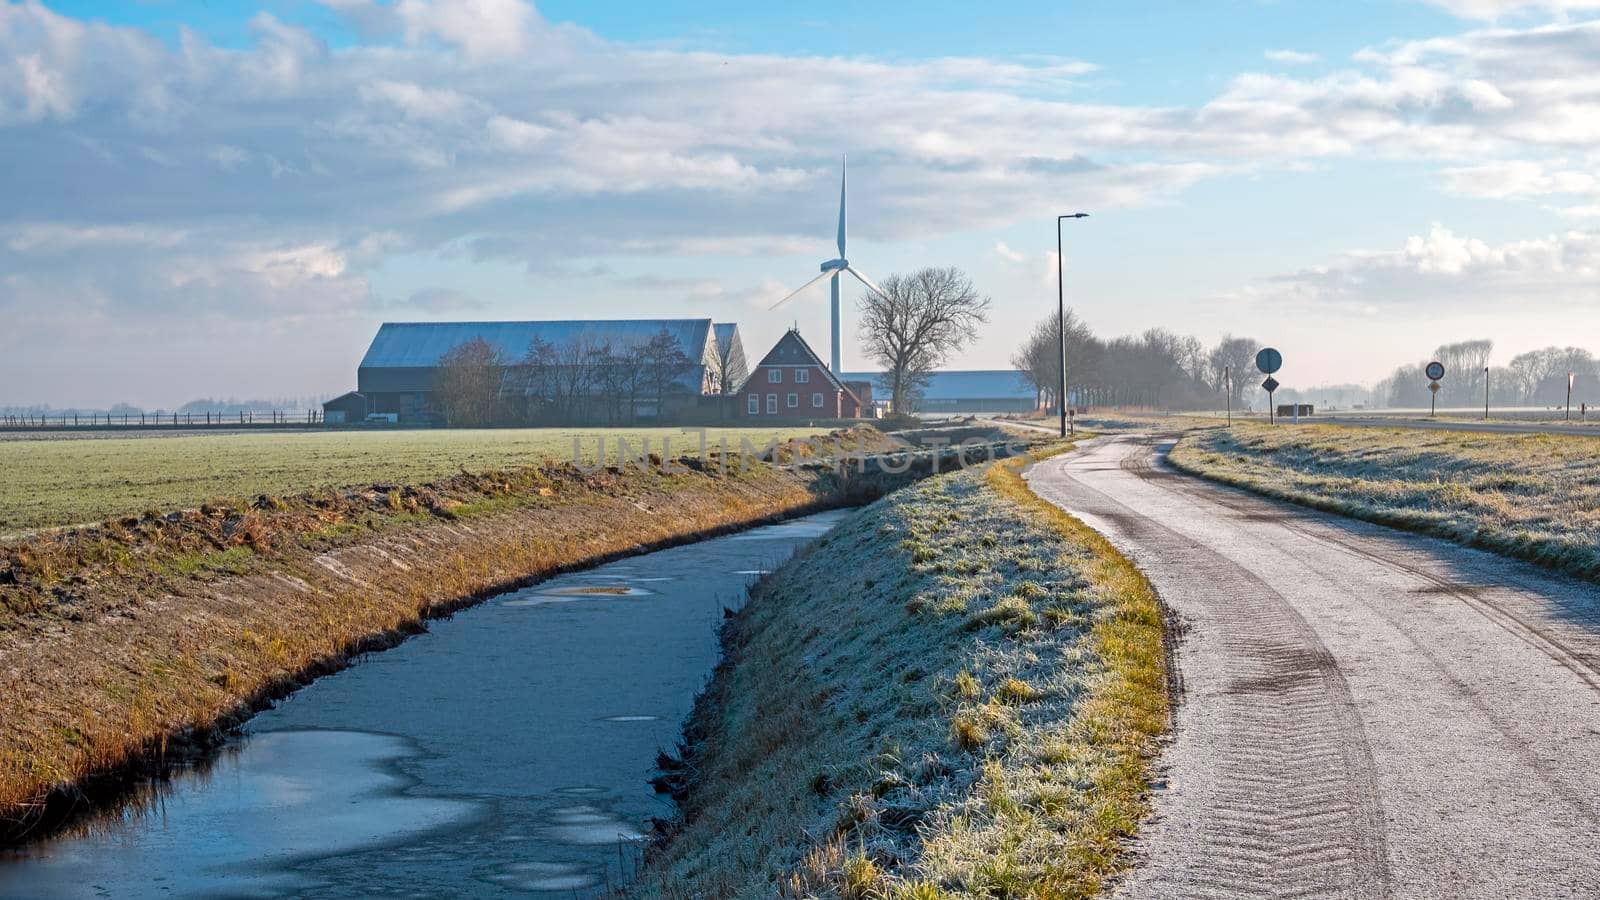 Winter landschape in the countryside from the Netherlands with windmills and farms